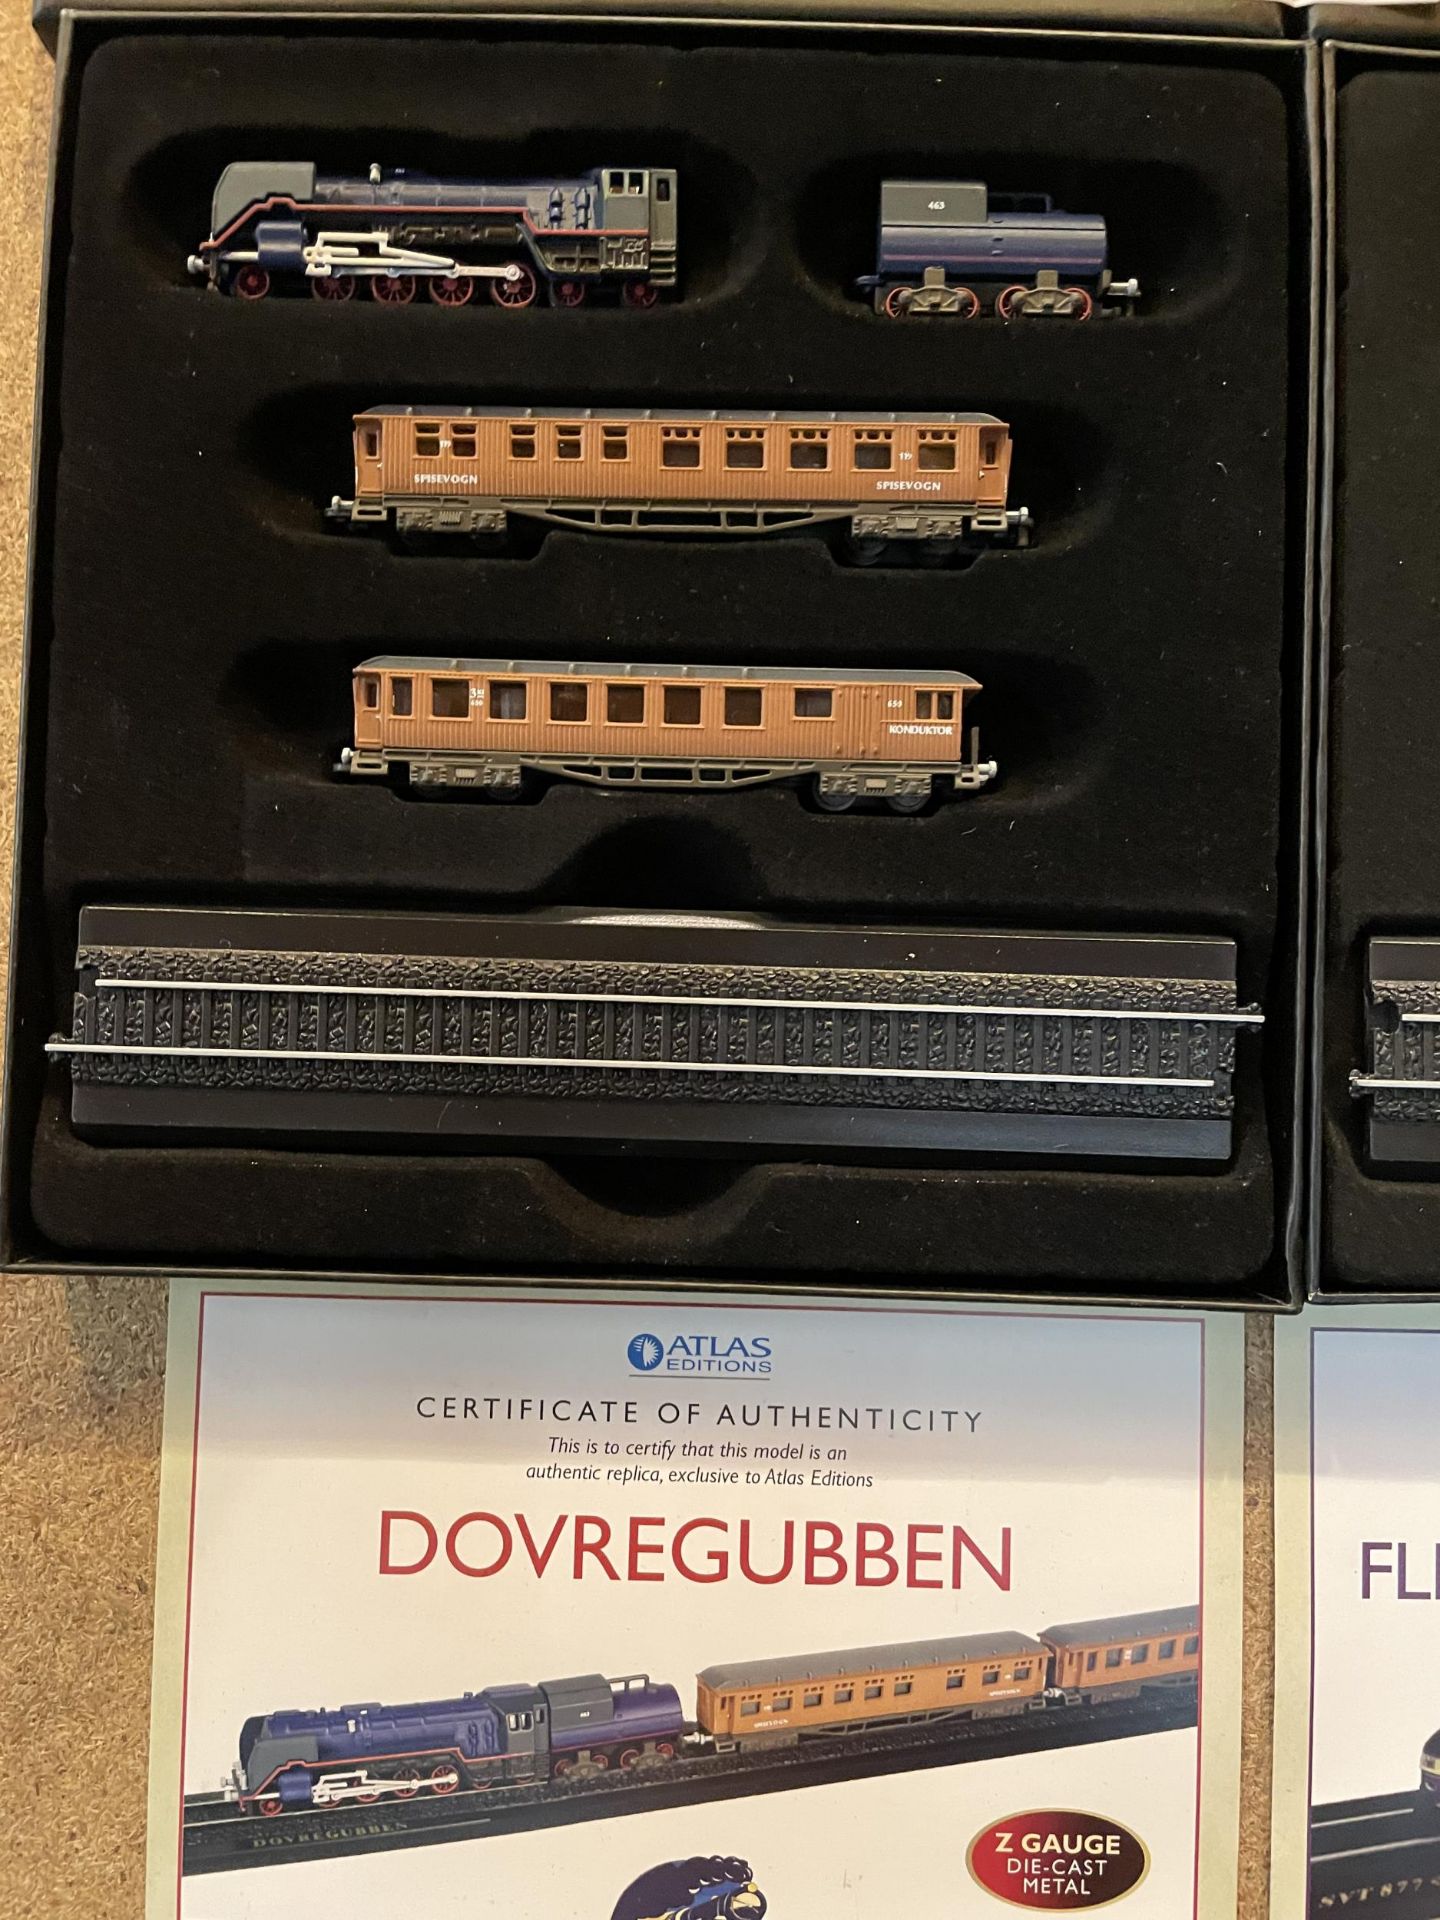 TWO MINI TRAINS SCALE 1/220 TO INCLUDE FLIEGENDER HAMBURGER AND DOVREGUBBEN - Image 2 of 3